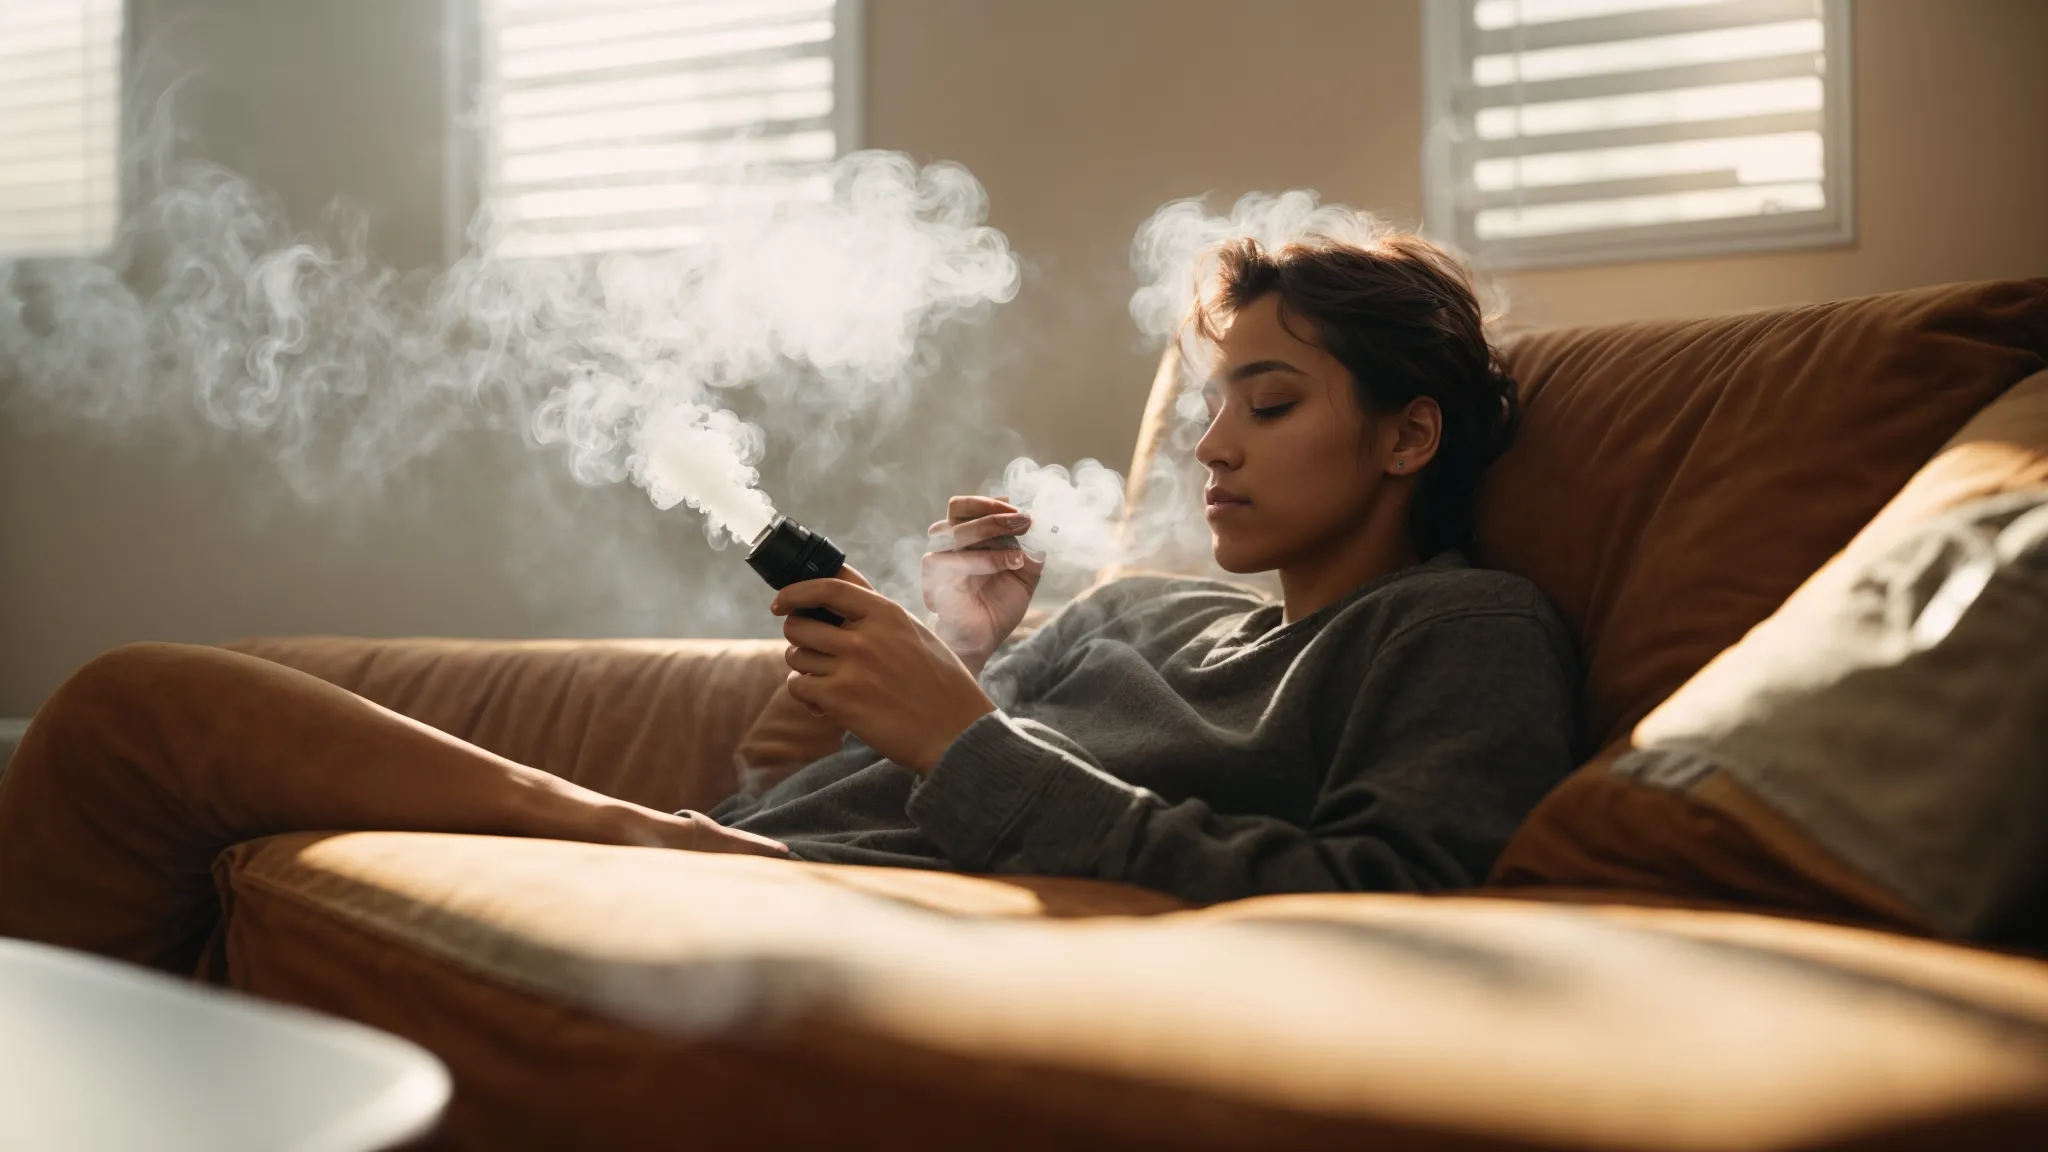 a person relaxing on a couch with a disposable vape in hand, enveloped by a gentle haze in a sunlit room.